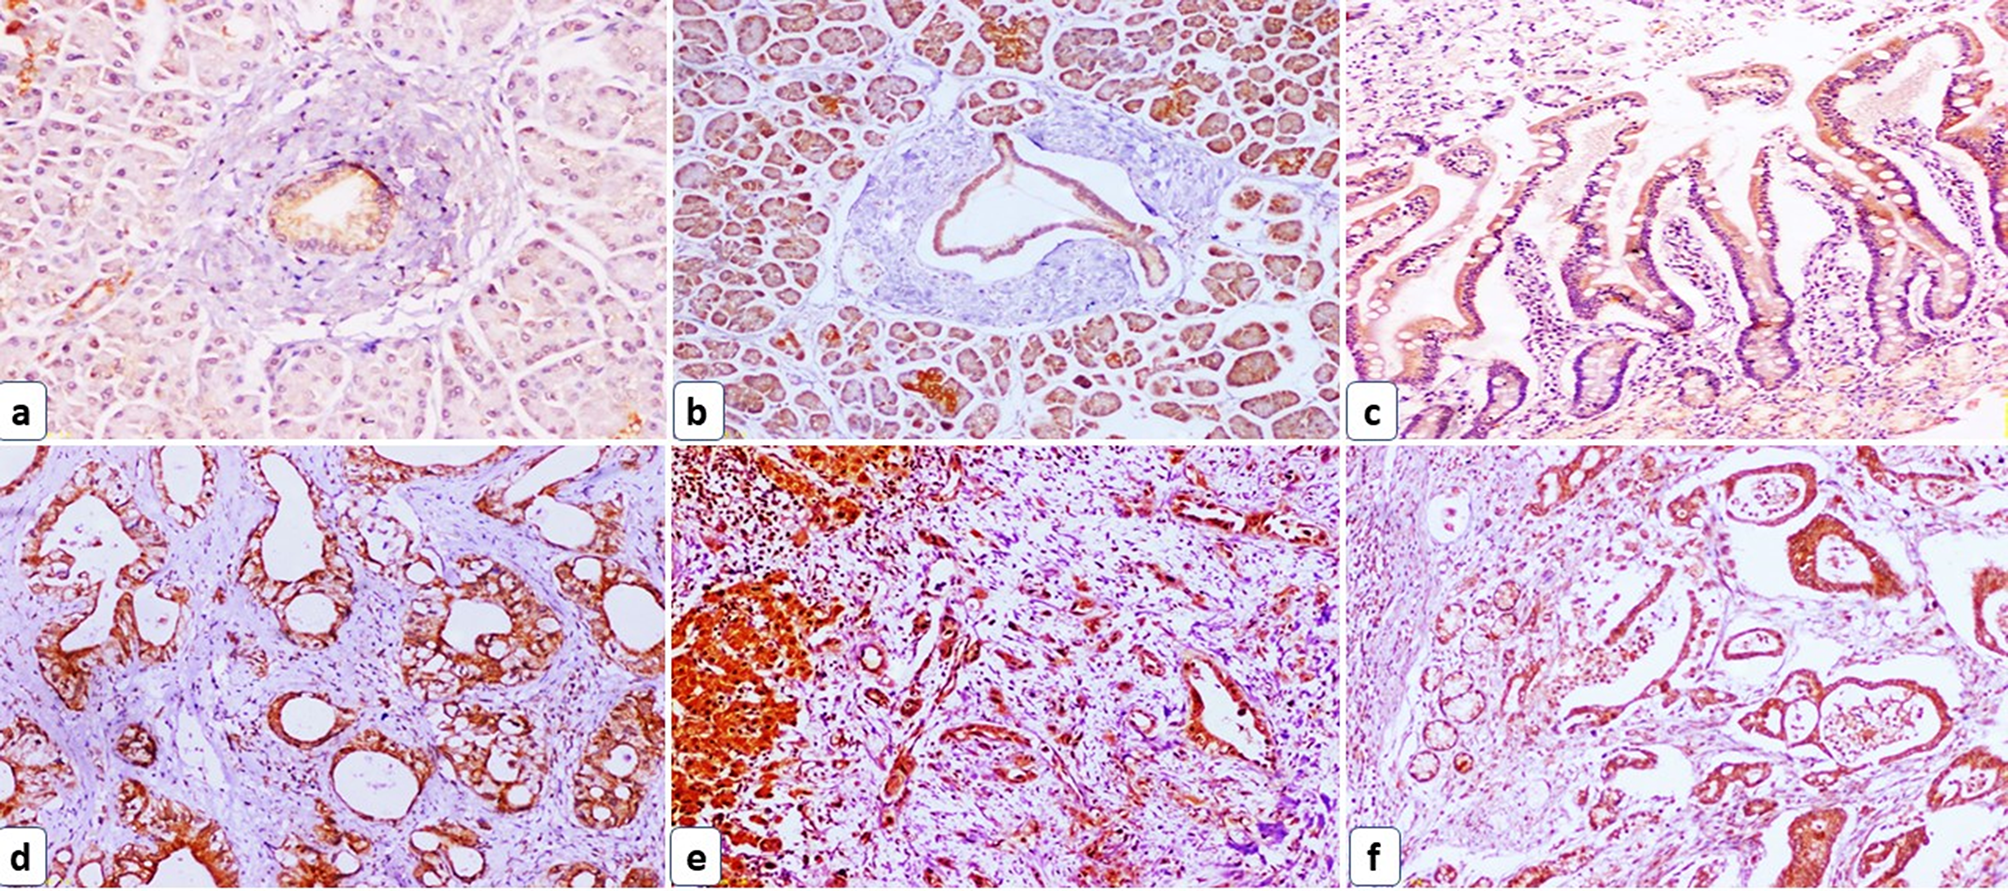 STIM1/SOX2 proteins are co-expressed in the tumor and microenvironmental stromal cells of pancreatic ductal adenocarcinoma and ampullary carcinoma